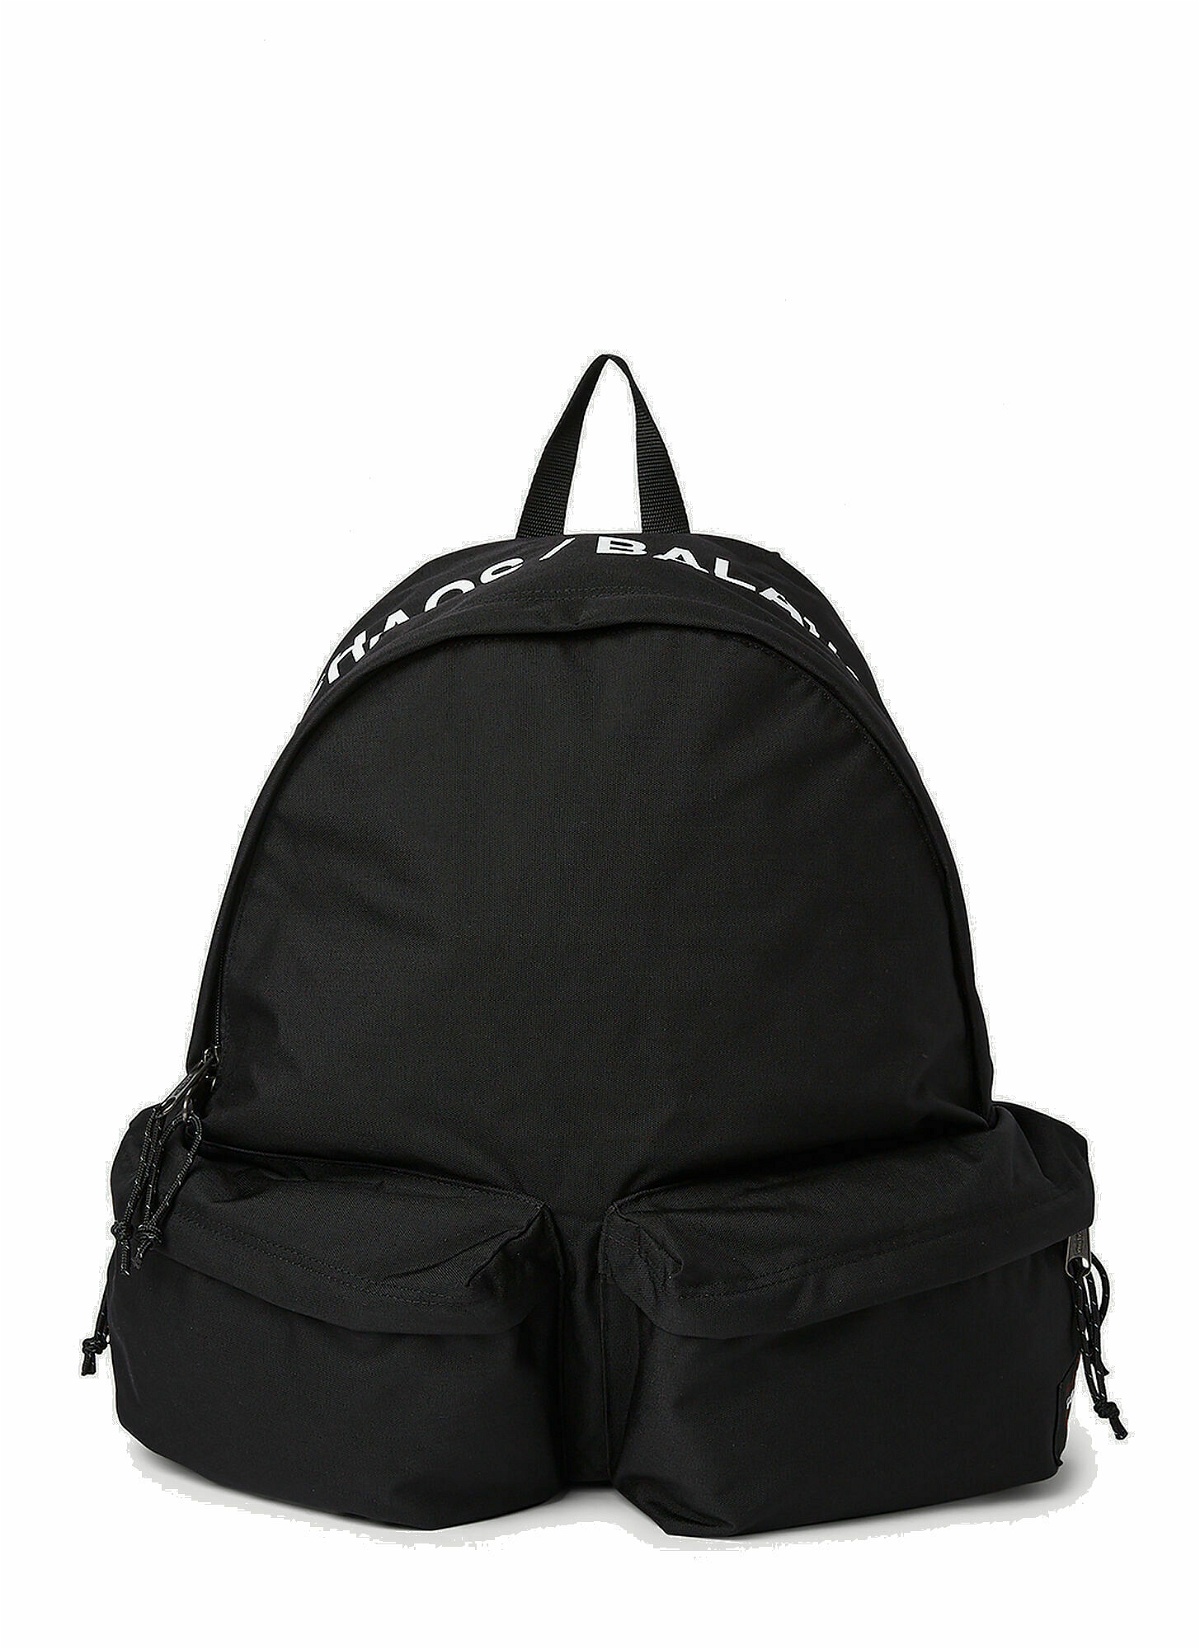 Photo: Eastpak x UNDERCOVER - Chaos Balance Backpack in Black